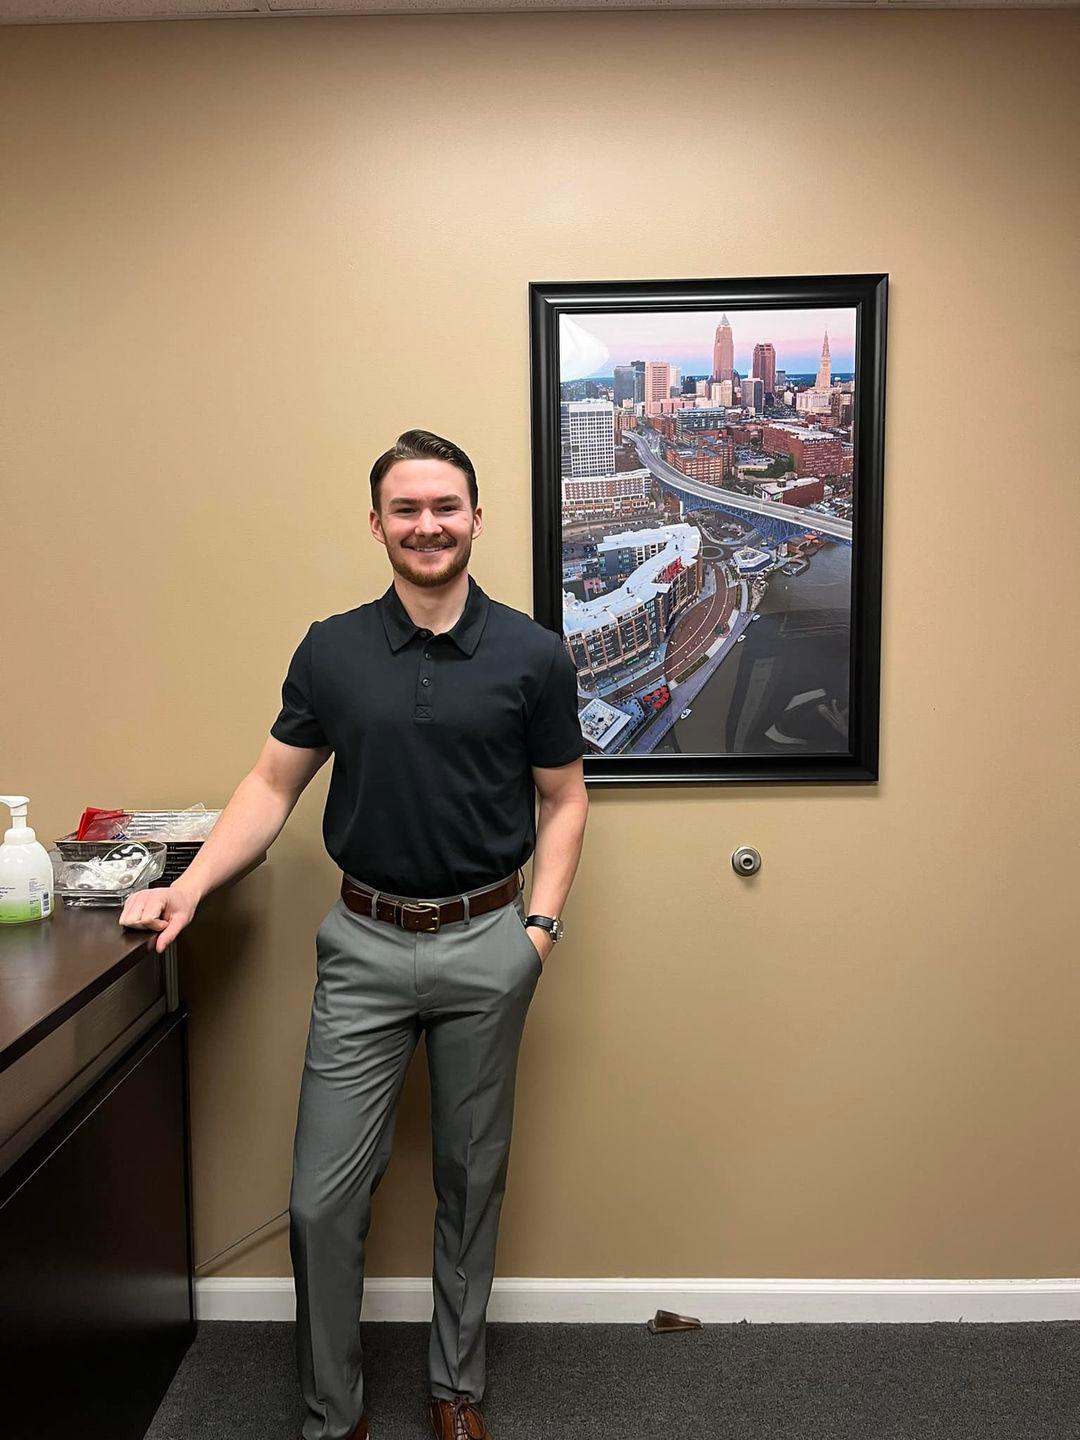 Let’s welcome our newest team member Matthew Geary! 🎉
Matthew went to Arch Bishop Hoban and graduated in 2017. In his free time he likes to hang out with friends/family and excercise. A random fact about Matthew is he graduated with his Bachelor’s in Information Systems! 
We’re super excited to have Matthew join our team!  ☺️
#statefarm #insurance #likeagoodneighborstatefarmisthere